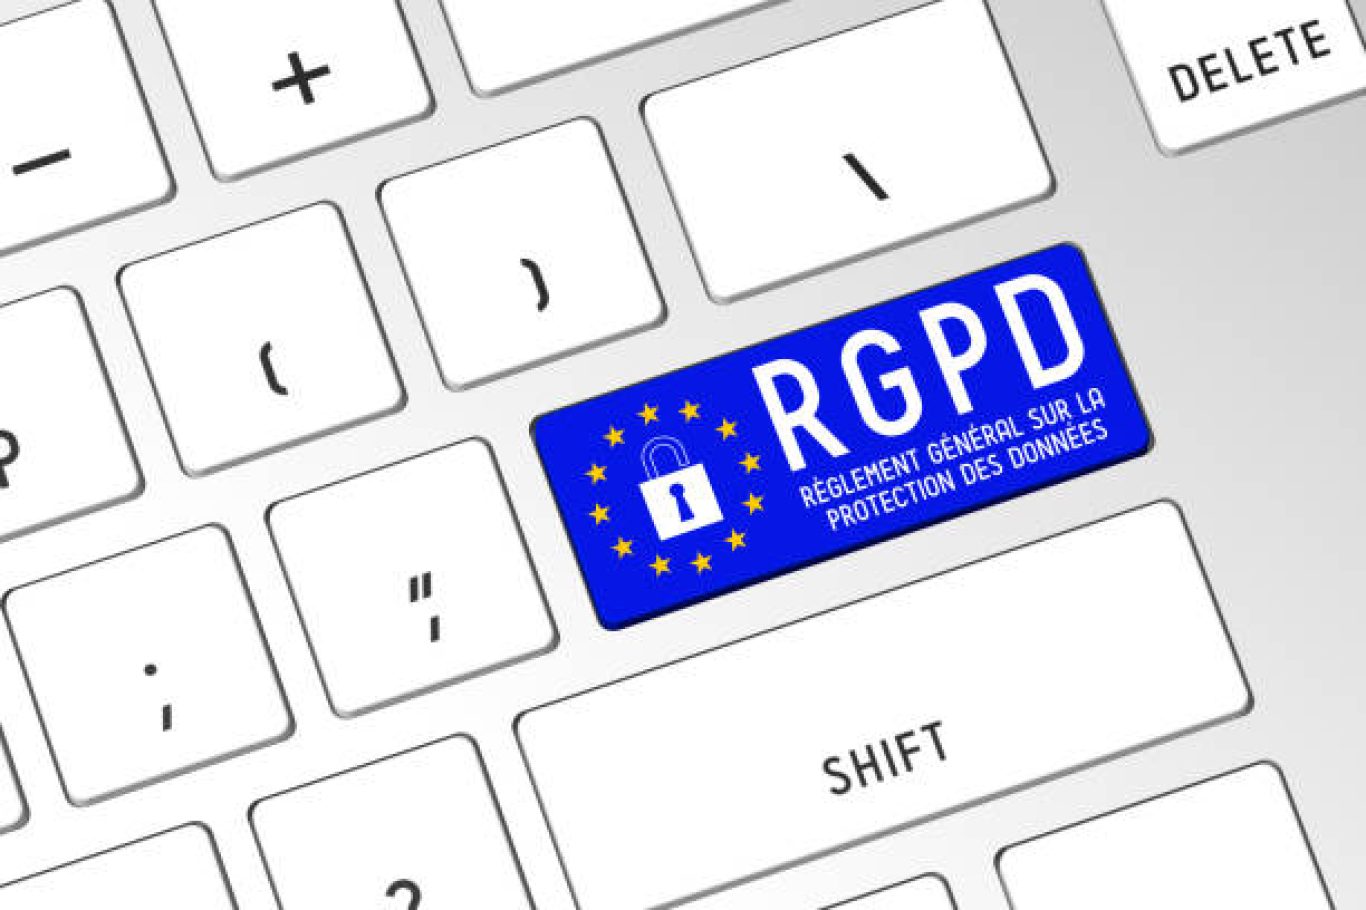 RGPD (French)/ GDPR (English) - General Data Protection Regulation - European Union flag and lock, computer keyboard.

Source of the map used for reference (European Union flag): https://en.wikipedia.org/wiki/Flag_of_Europe